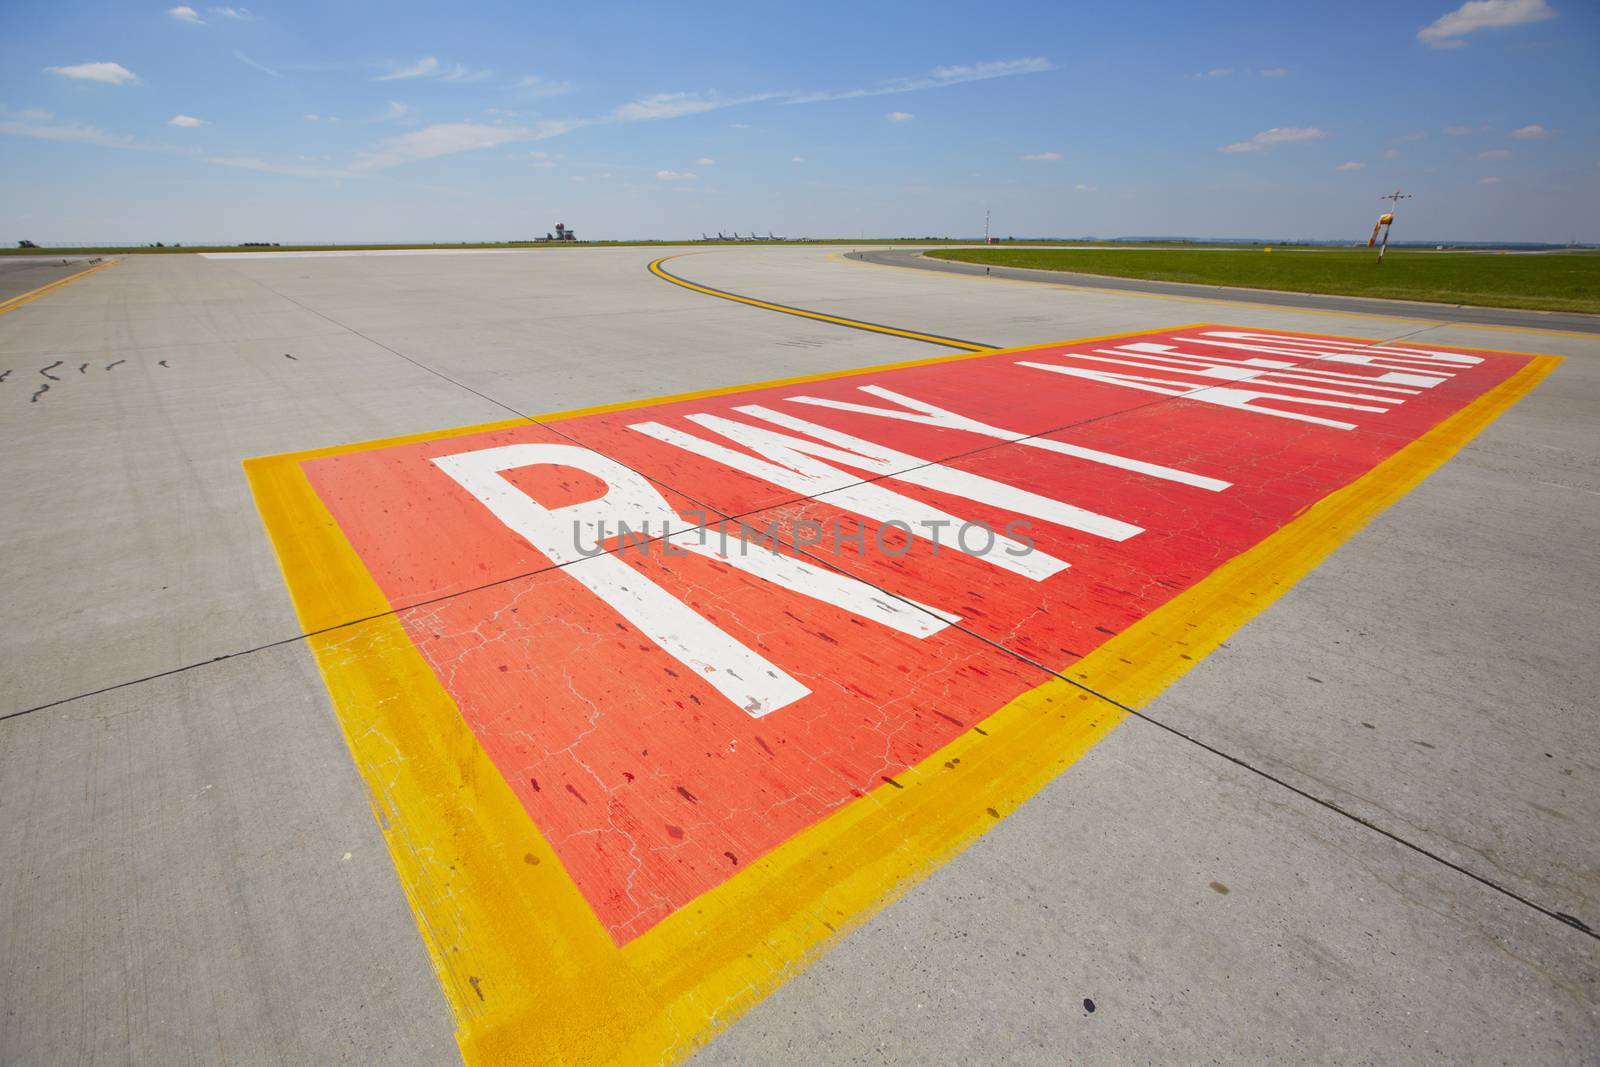 Airfield - marking on taxiway is heading to runway. 